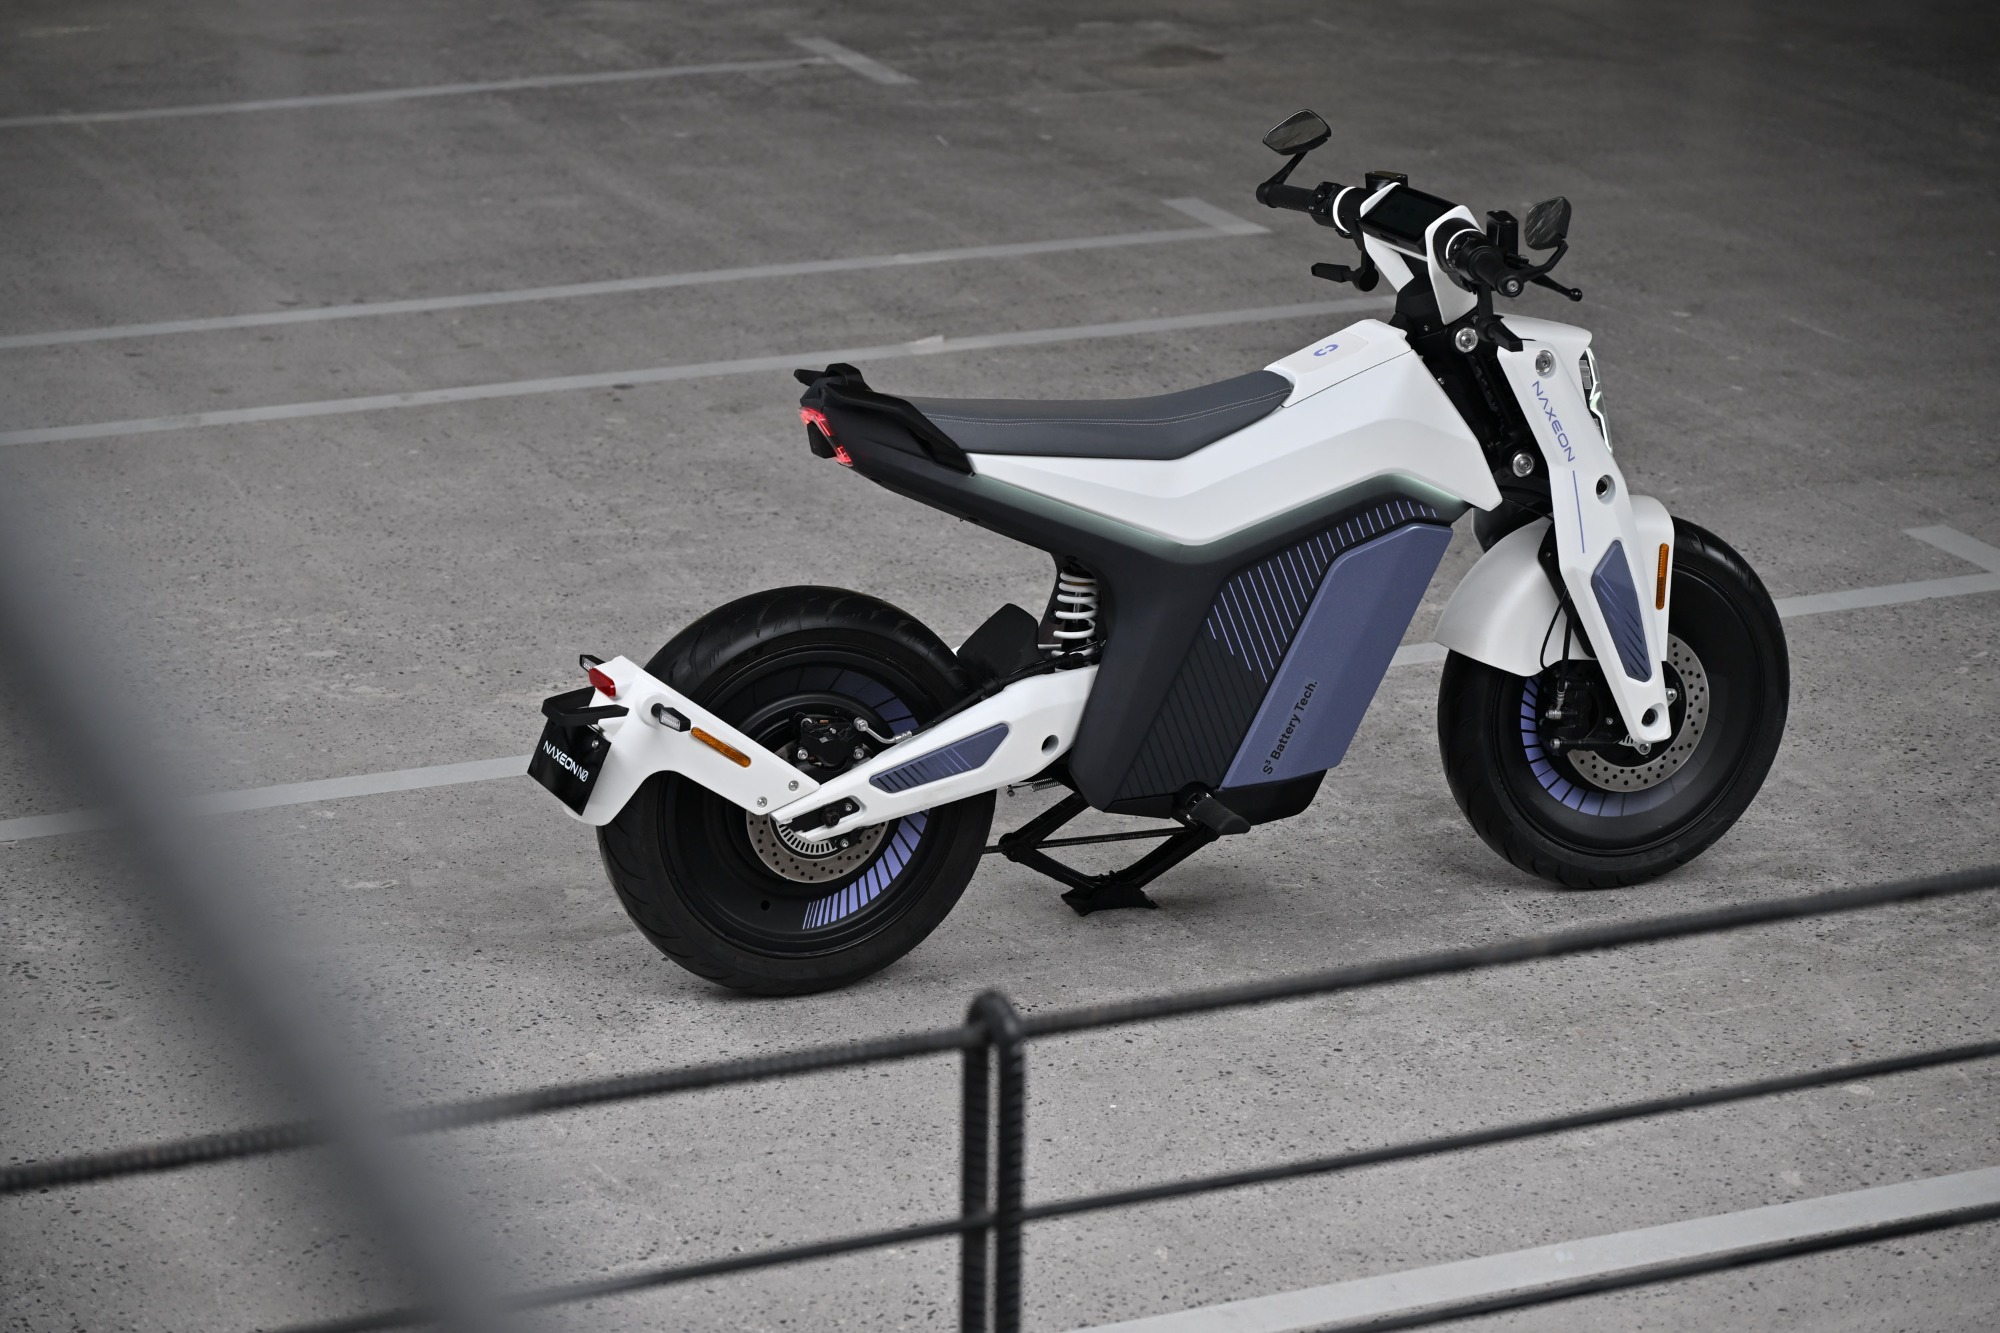 NAXEON I AM. e-moto electric mini-bike unveiled with exciting features for daily commute